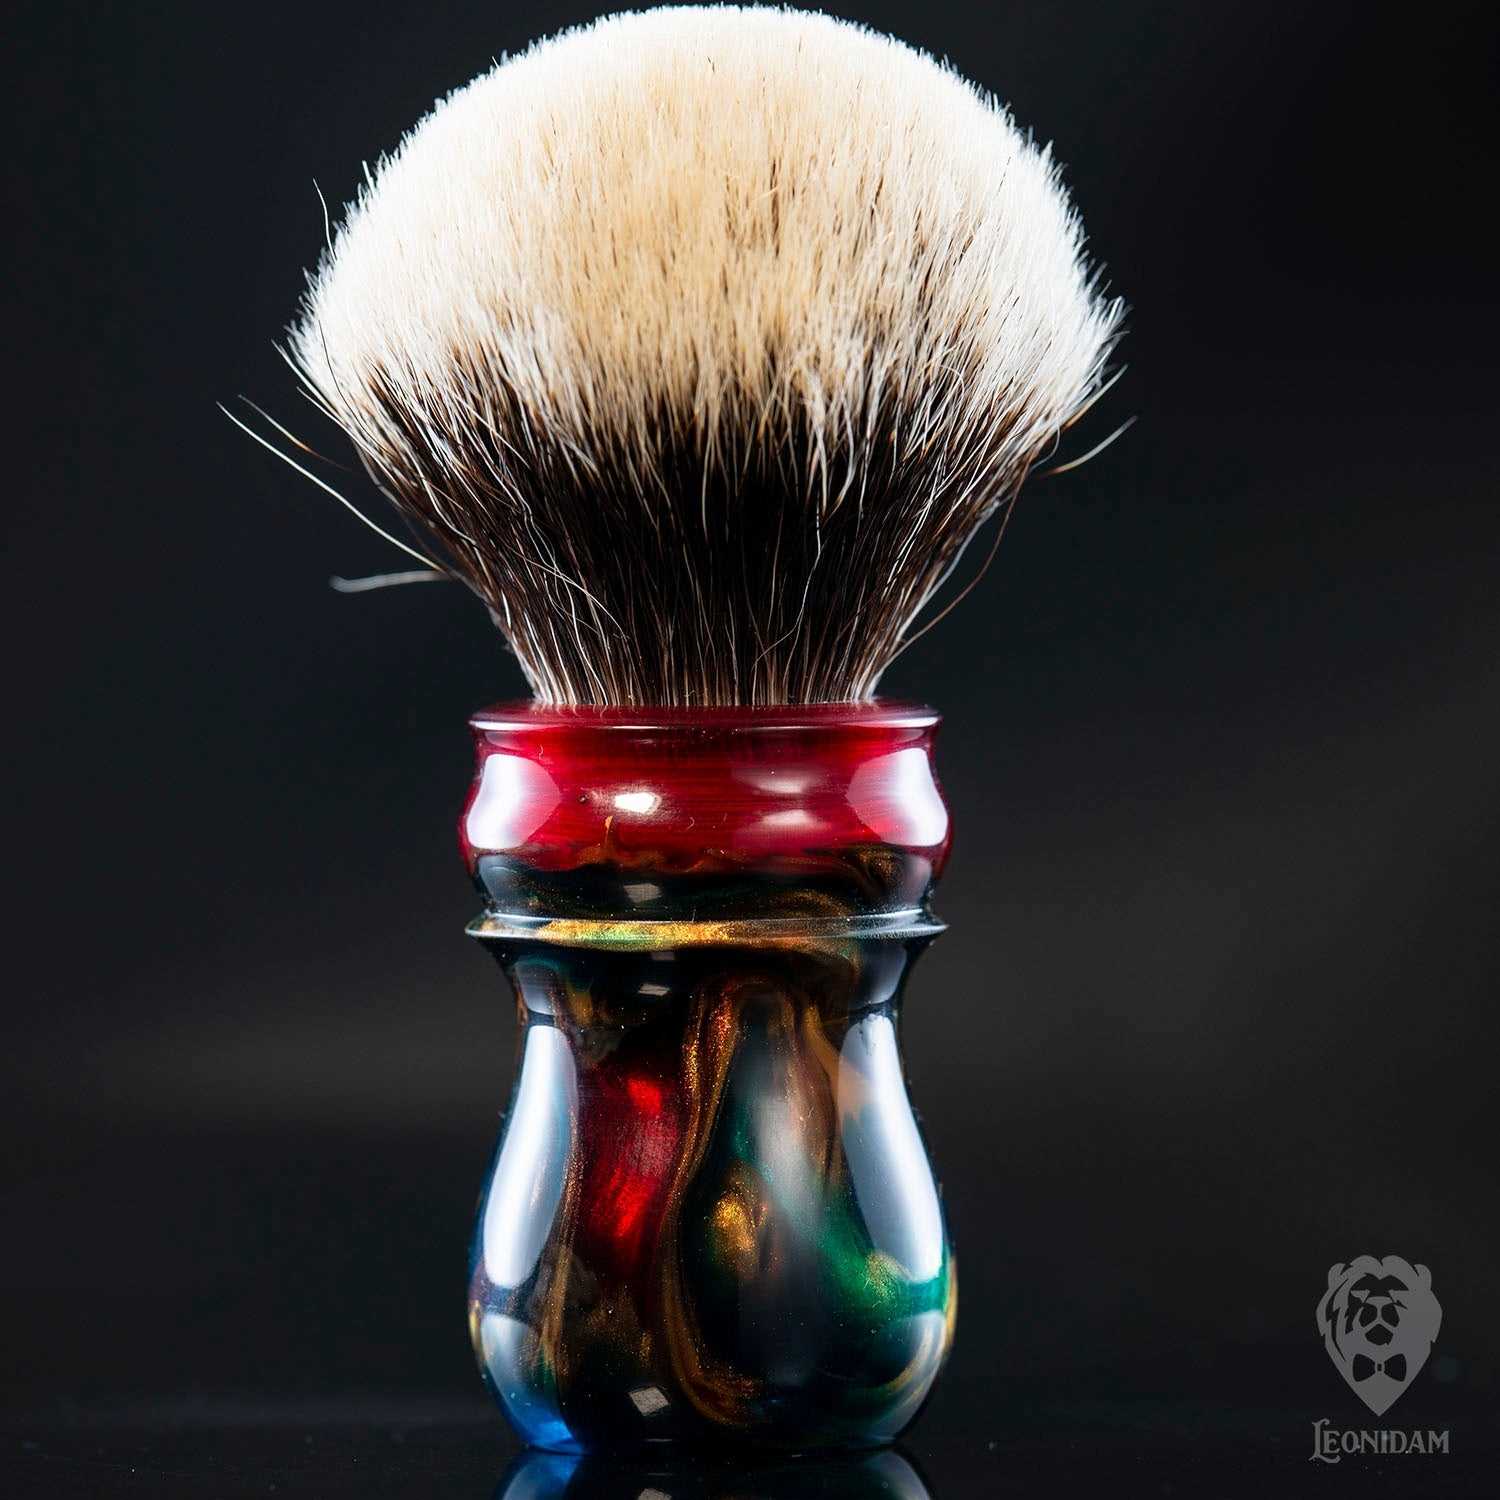 Handmade shaving brush "Vivaldi", with blue, red and gold hand poured resin handle .